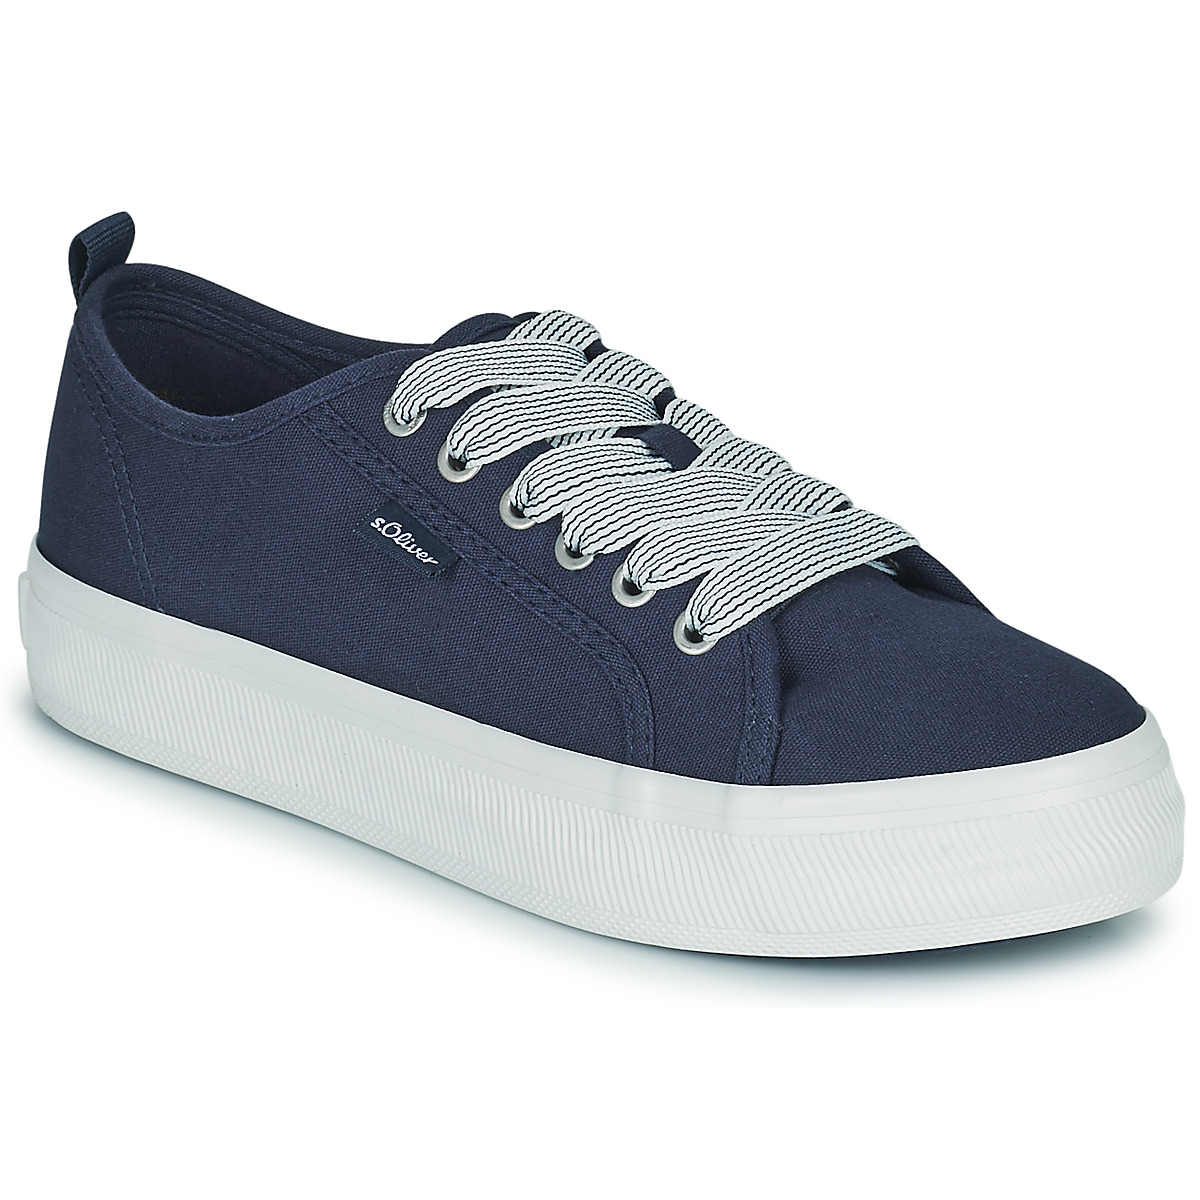 Xαμηλά Sneakers S.Oliver 23618 Ύφασμα